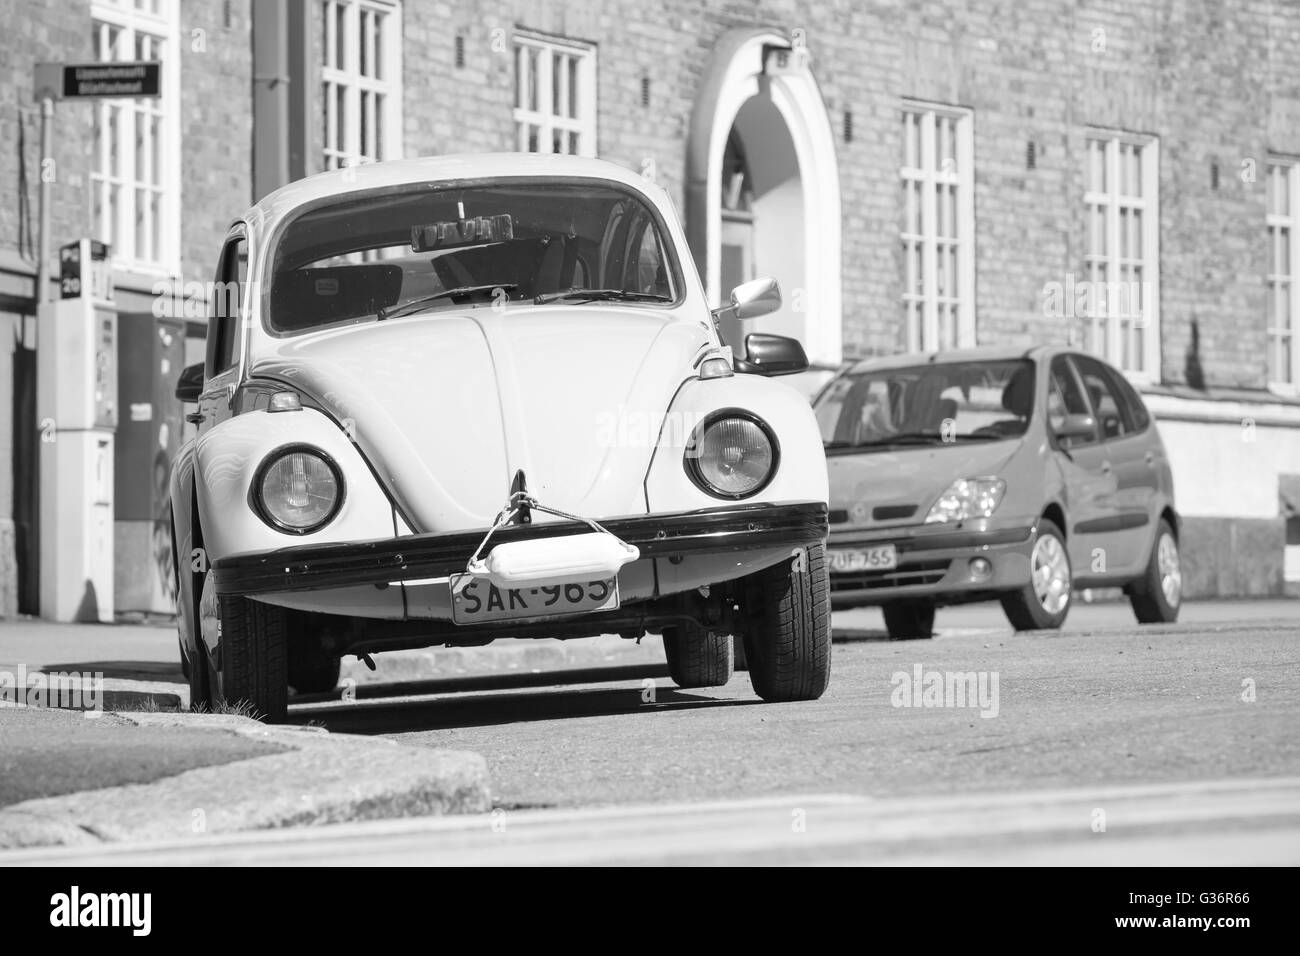 Helsinki, Finland - May 7, 2016: Old Volkswagen beetle is parked on a roadside, front view, black and white photo Stock Photo